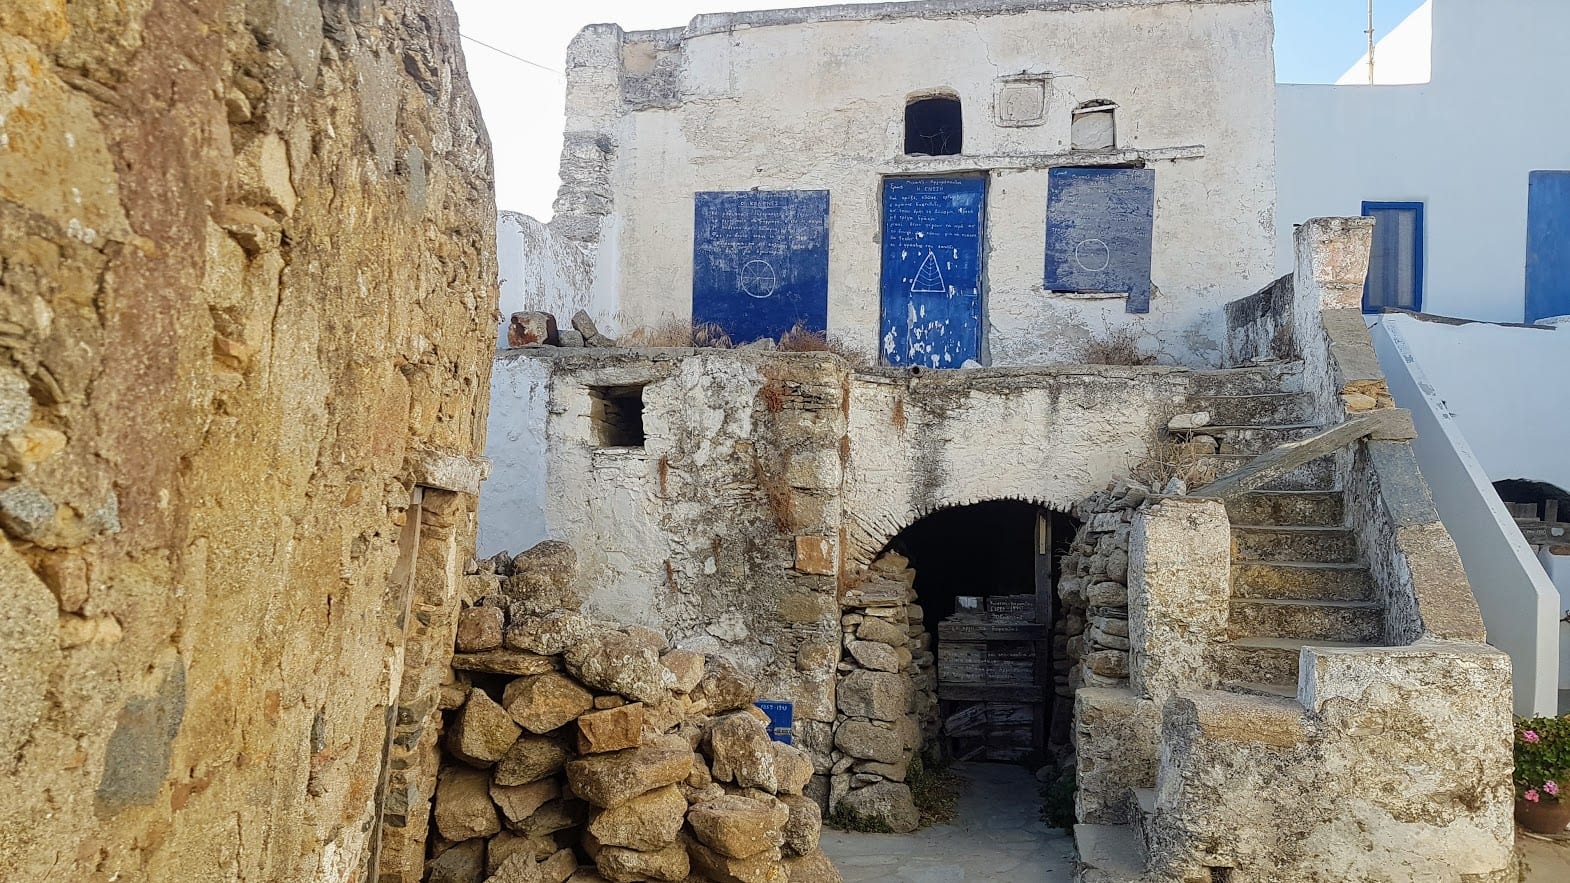 Poetry written on buildings in Volax village, Tinos